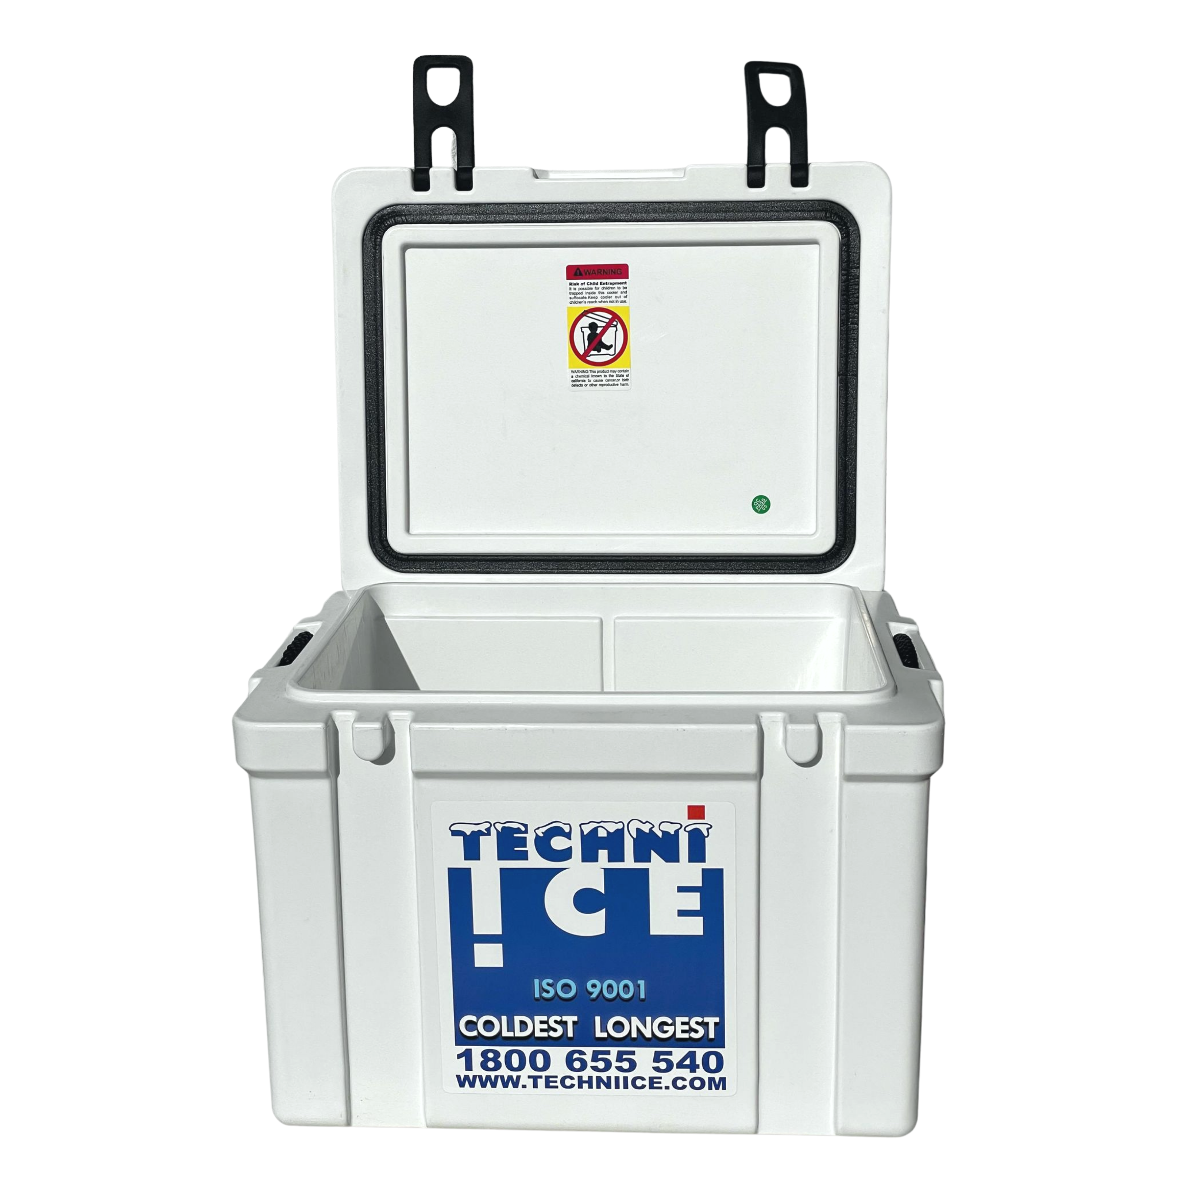 Techniice Classic Hybrid Ice box 25L White *PRE ORDER FOR APRIL DESPATCH *FREE 6 REUSABLE DRY ICE PACKS VALUES $32.95